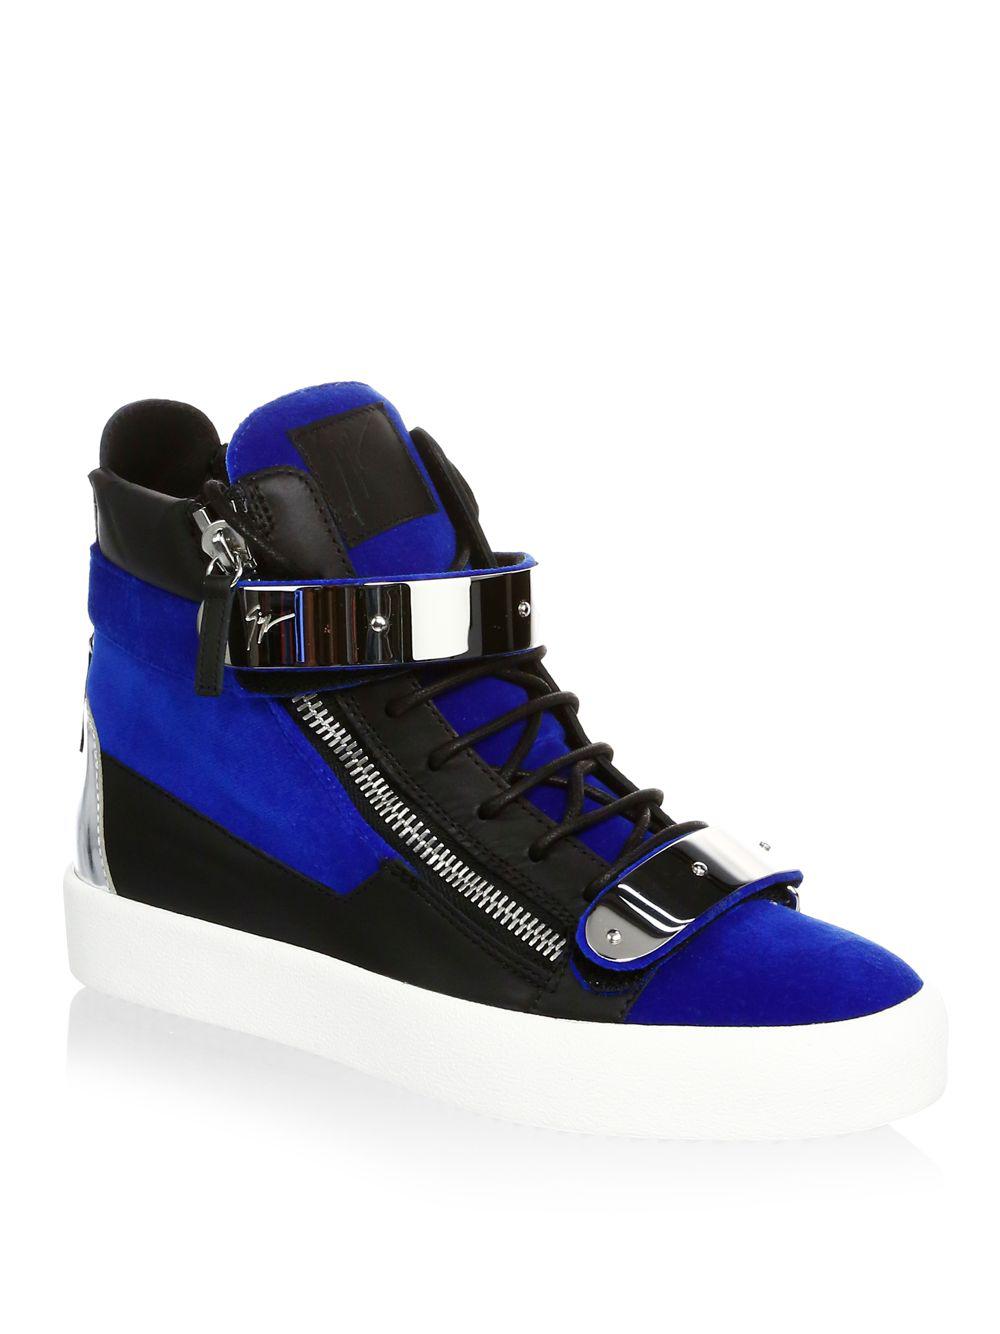 Giuseppe Zanotti Leather Embroidered High-top Sneakers in Blue - Lyst